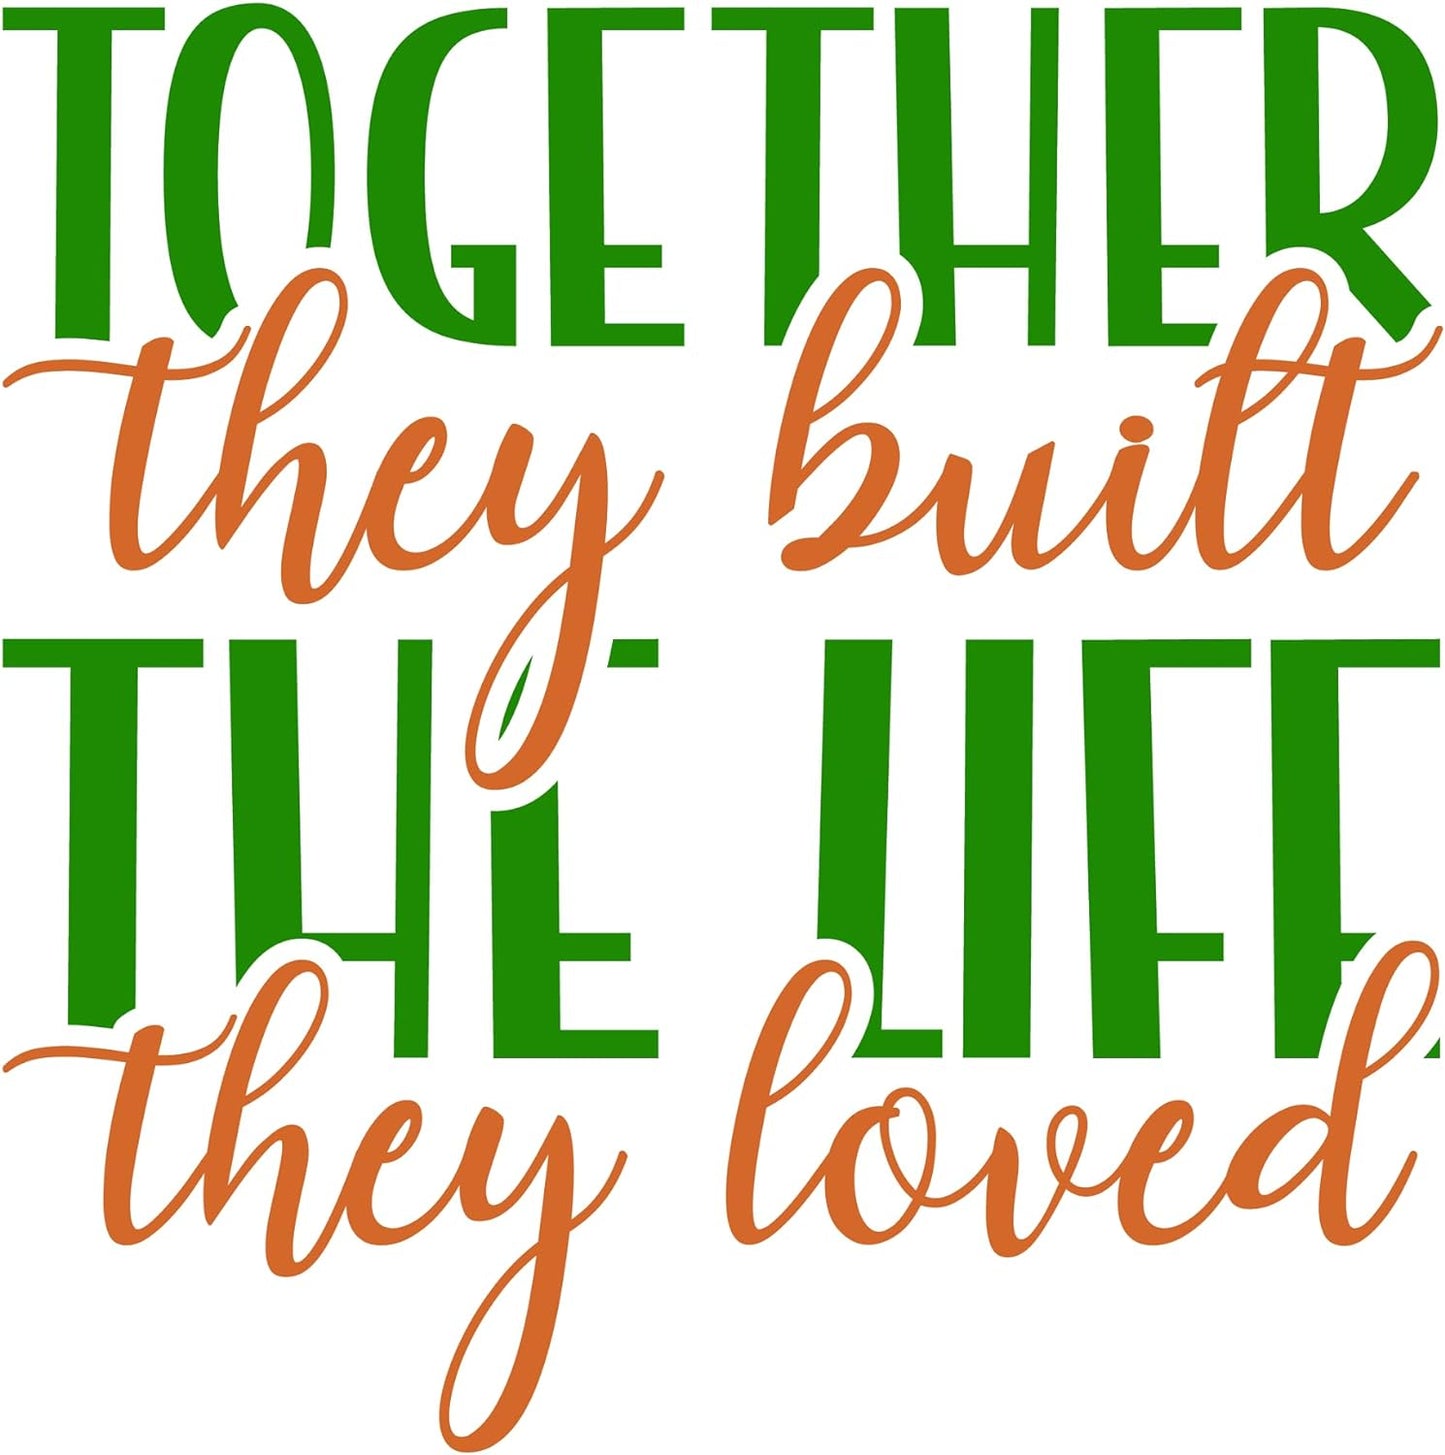 Inspirational Quote "Together They Built The Life They Loved" Motivational Sticker Vinyl Decal Motivation Stickers- 5" Vinyl Sticker Waterproof